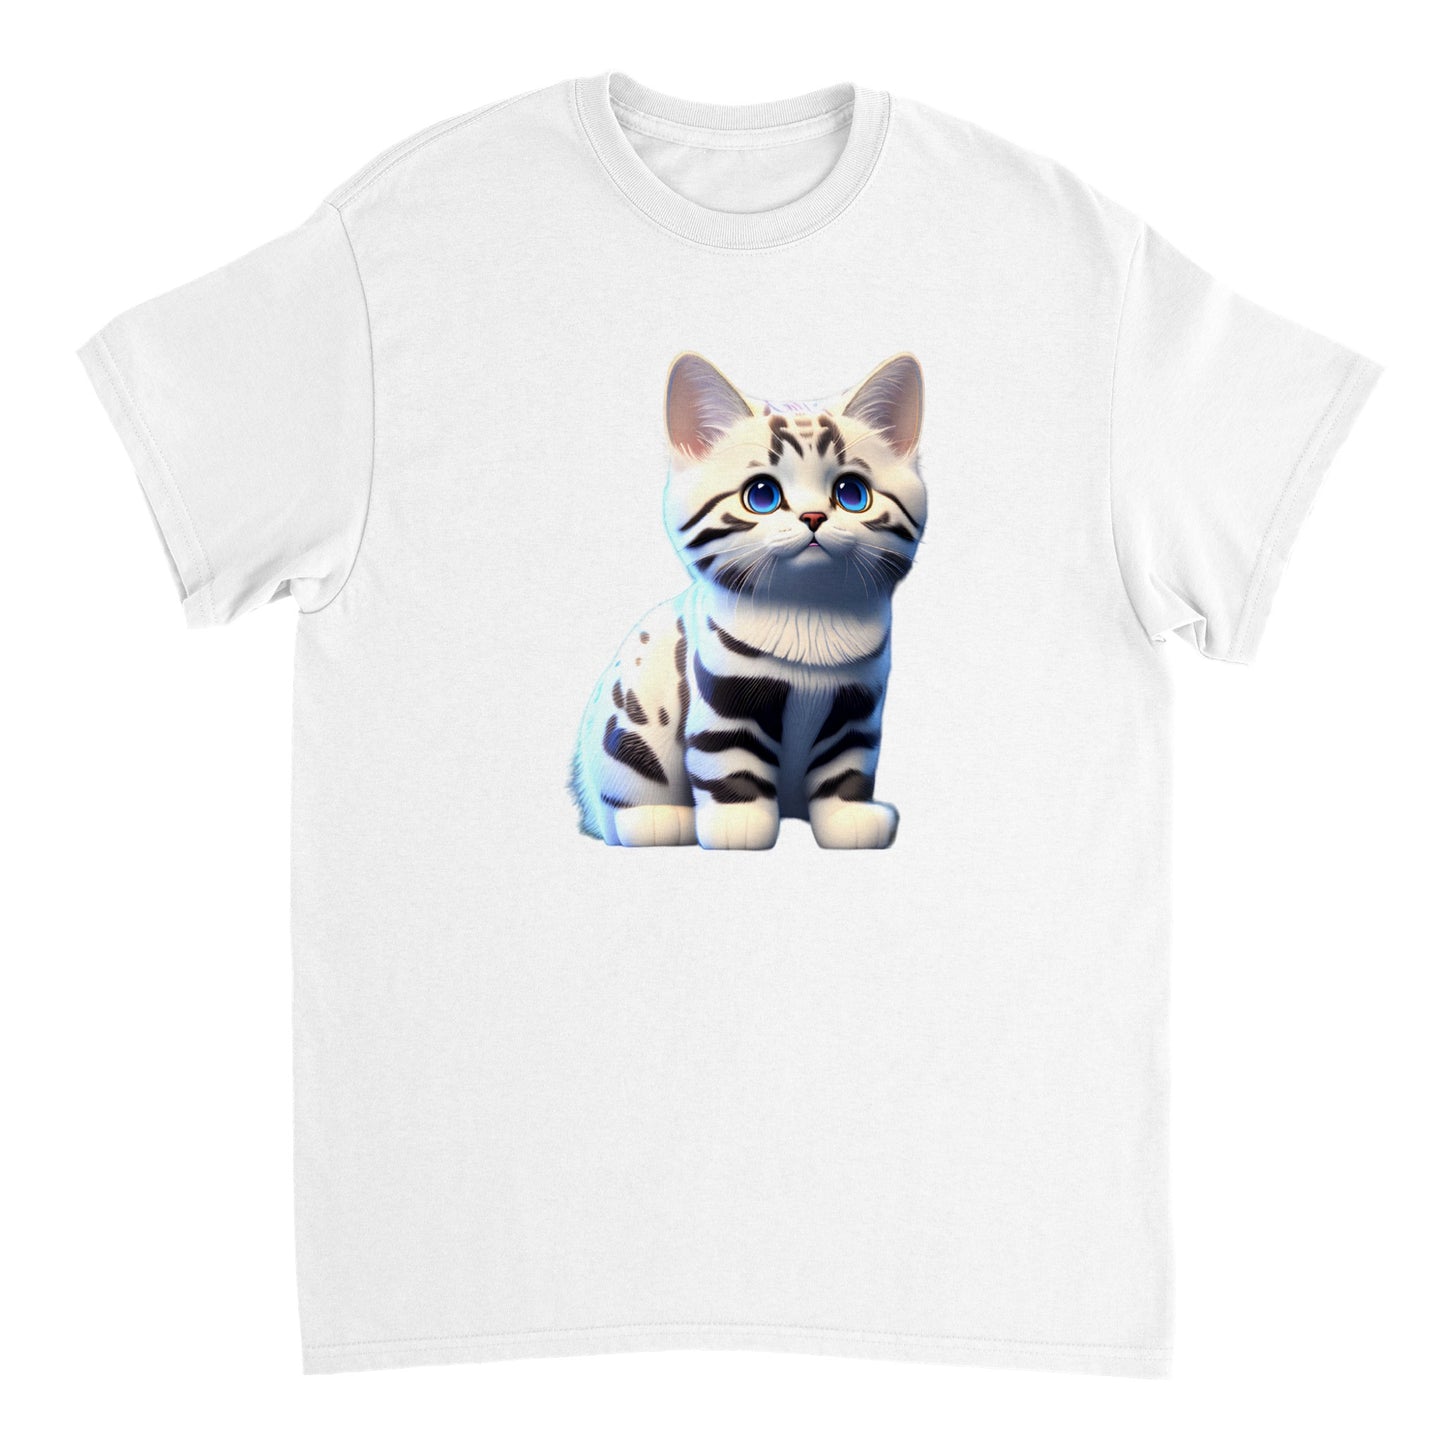 Adorable, Cool, Cute Cats and Kittens Toy - Heavyweight Unisex Crewneck T-shirt 46